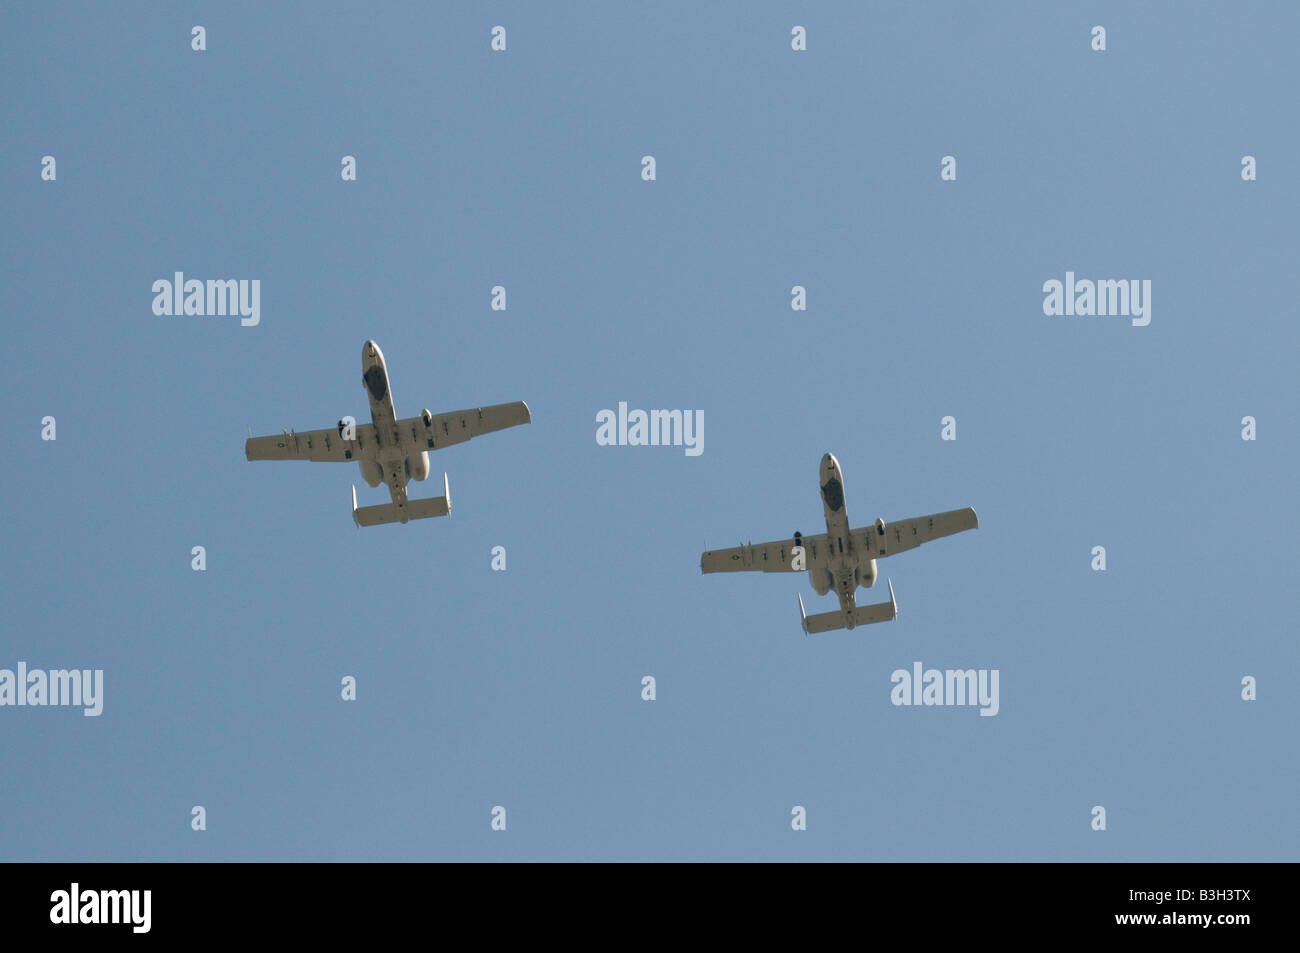 Idaho Boise Military Army National Guard Wart Hog fighter planes making a fly over Stock Photo